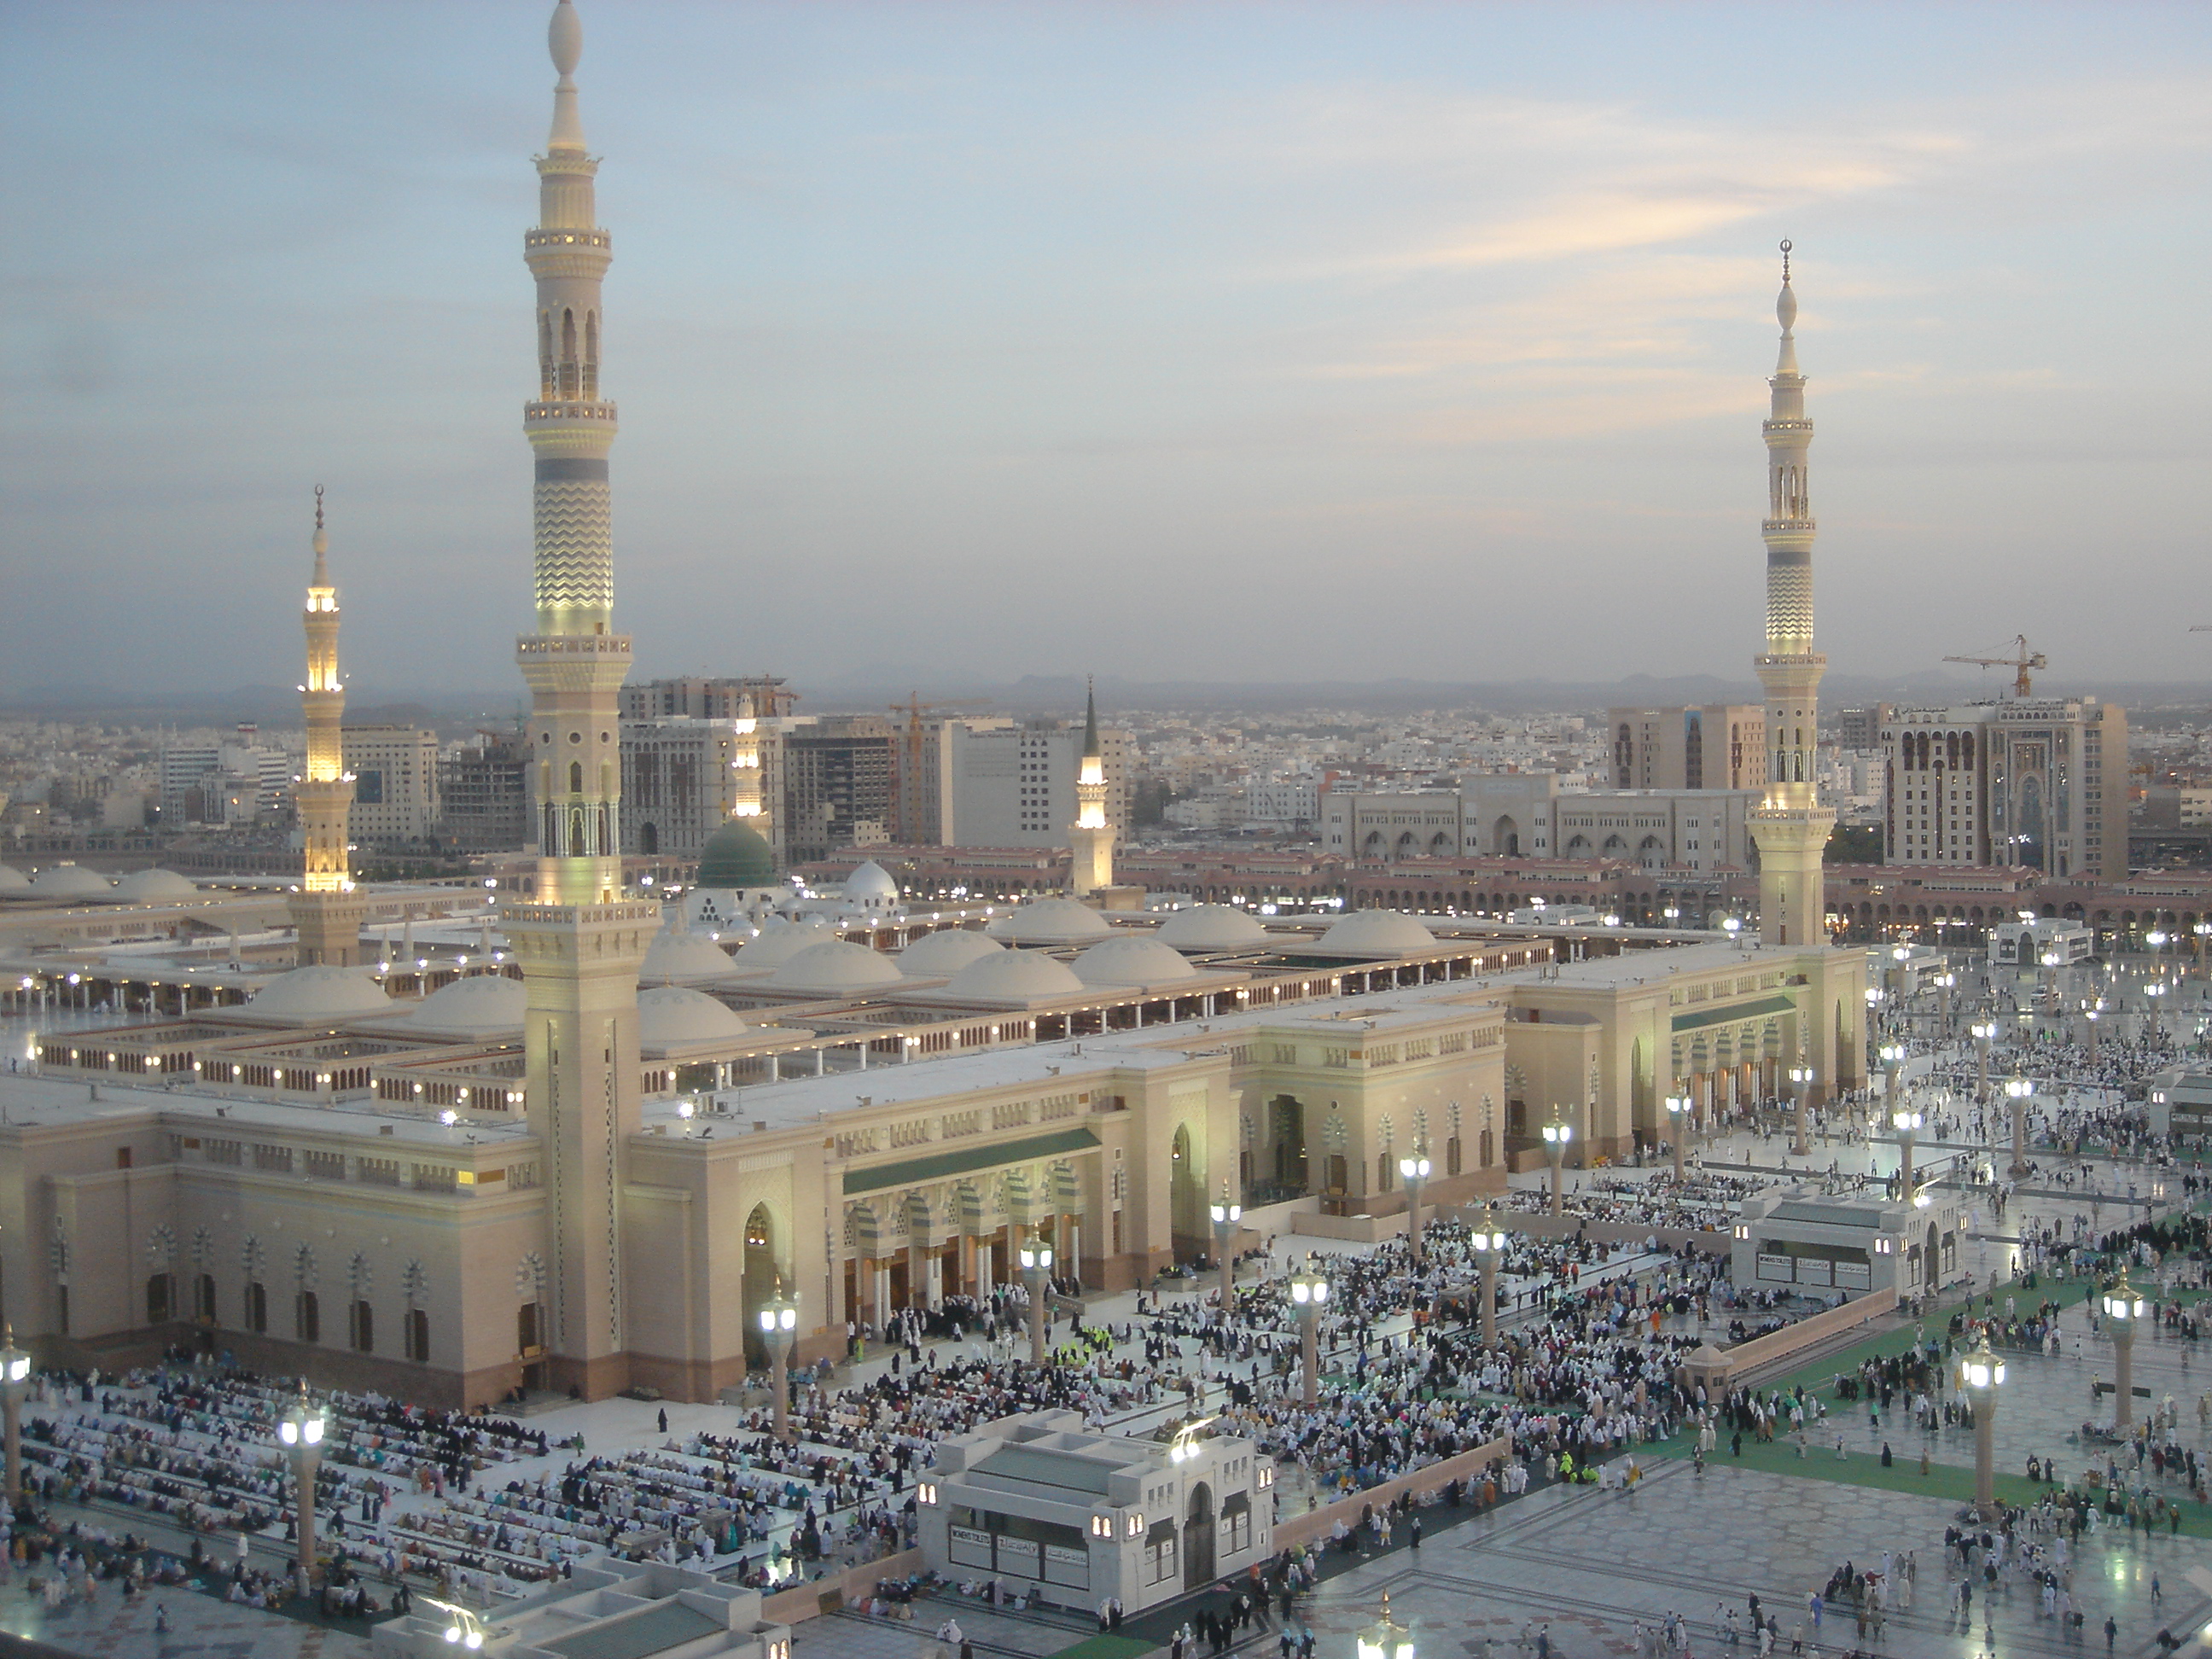 Featured photo: “Masjid-al-Nabawi at dusk,” © 2009 Fraz Ismat, used under a Creative Commons Attribution license: http://creativecommons.org/licenses/by/2.0/deed.en